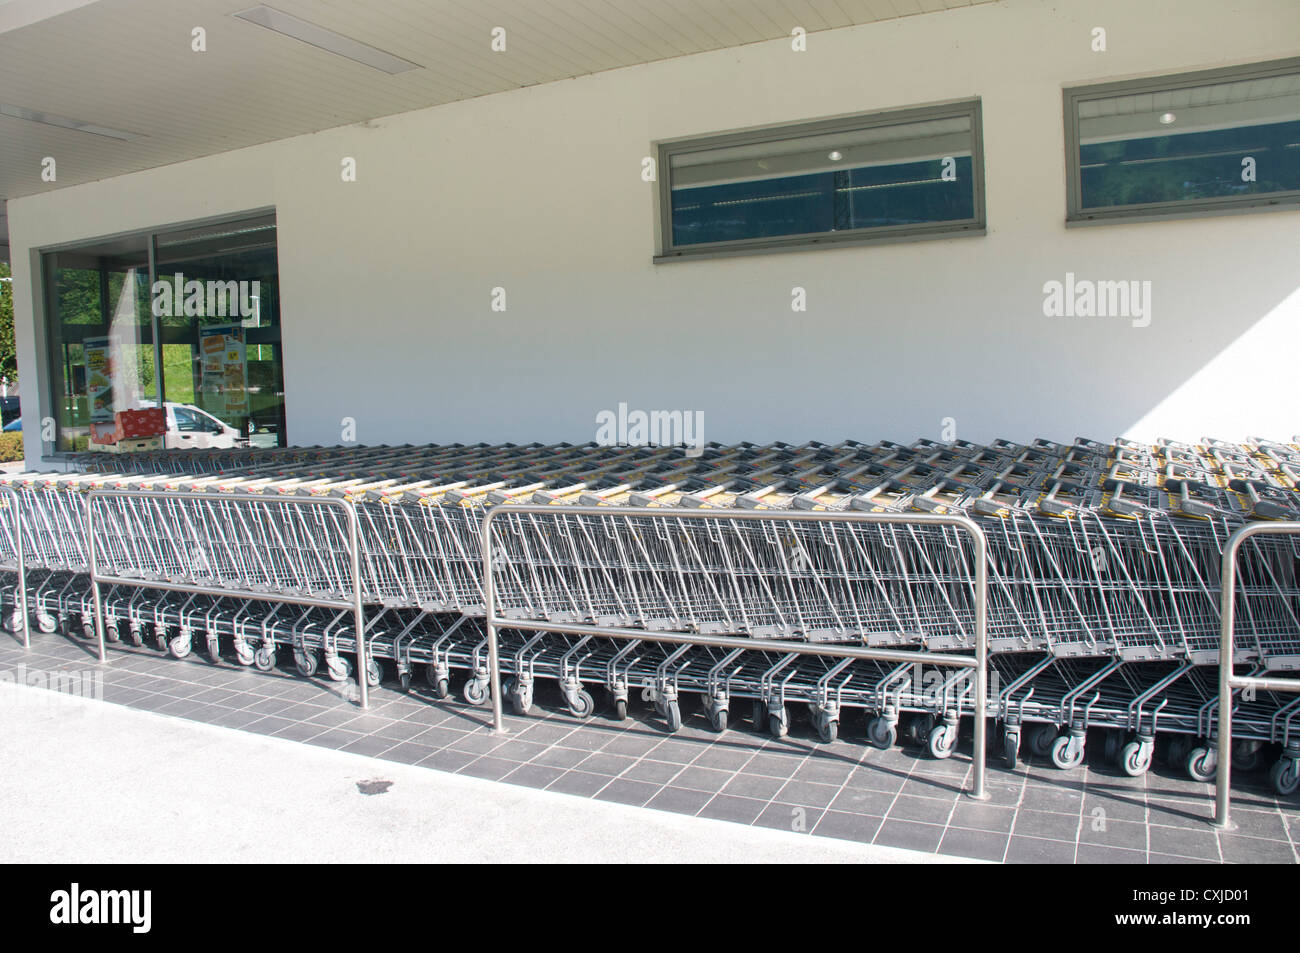 Shopping Carts at the Hofer (Aldi) discount supermarket Photographed in Austria Stock Photo